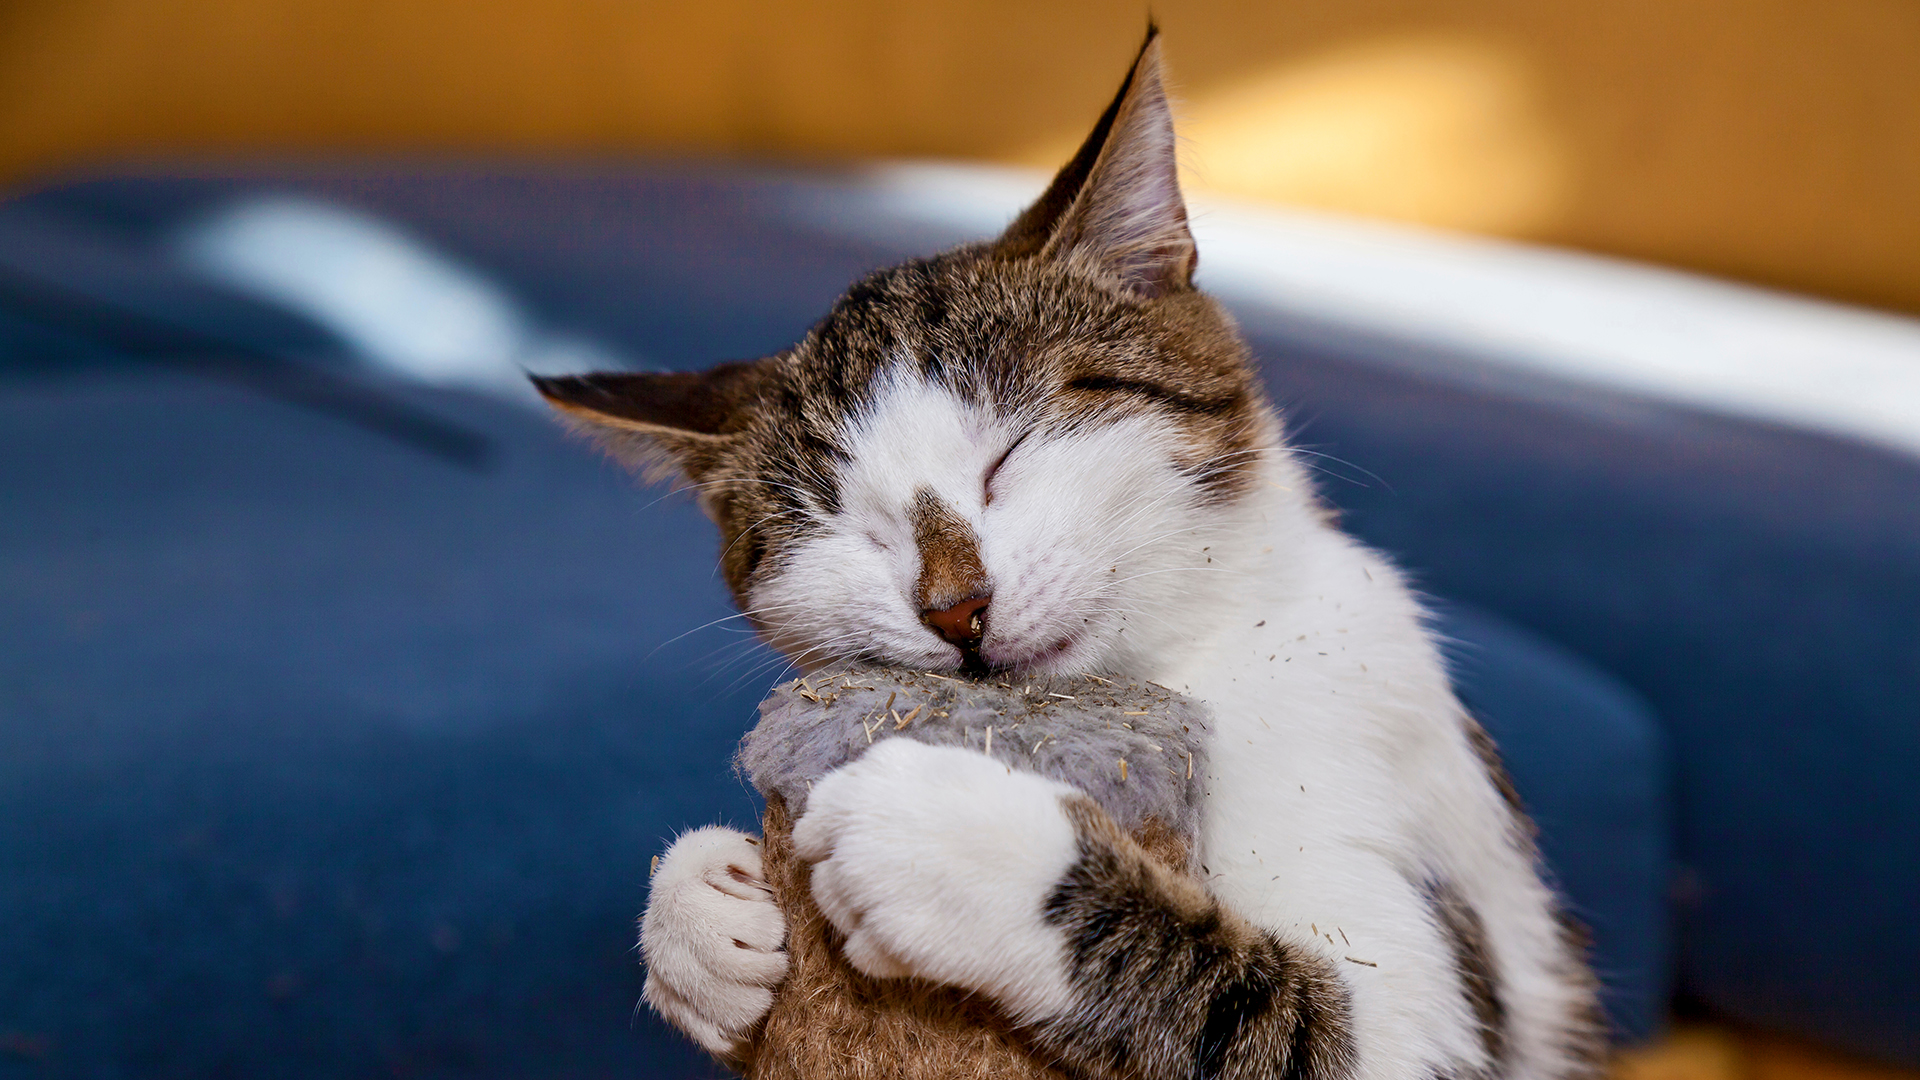 Does Catnip Really Make Cats 'High'? Live Science